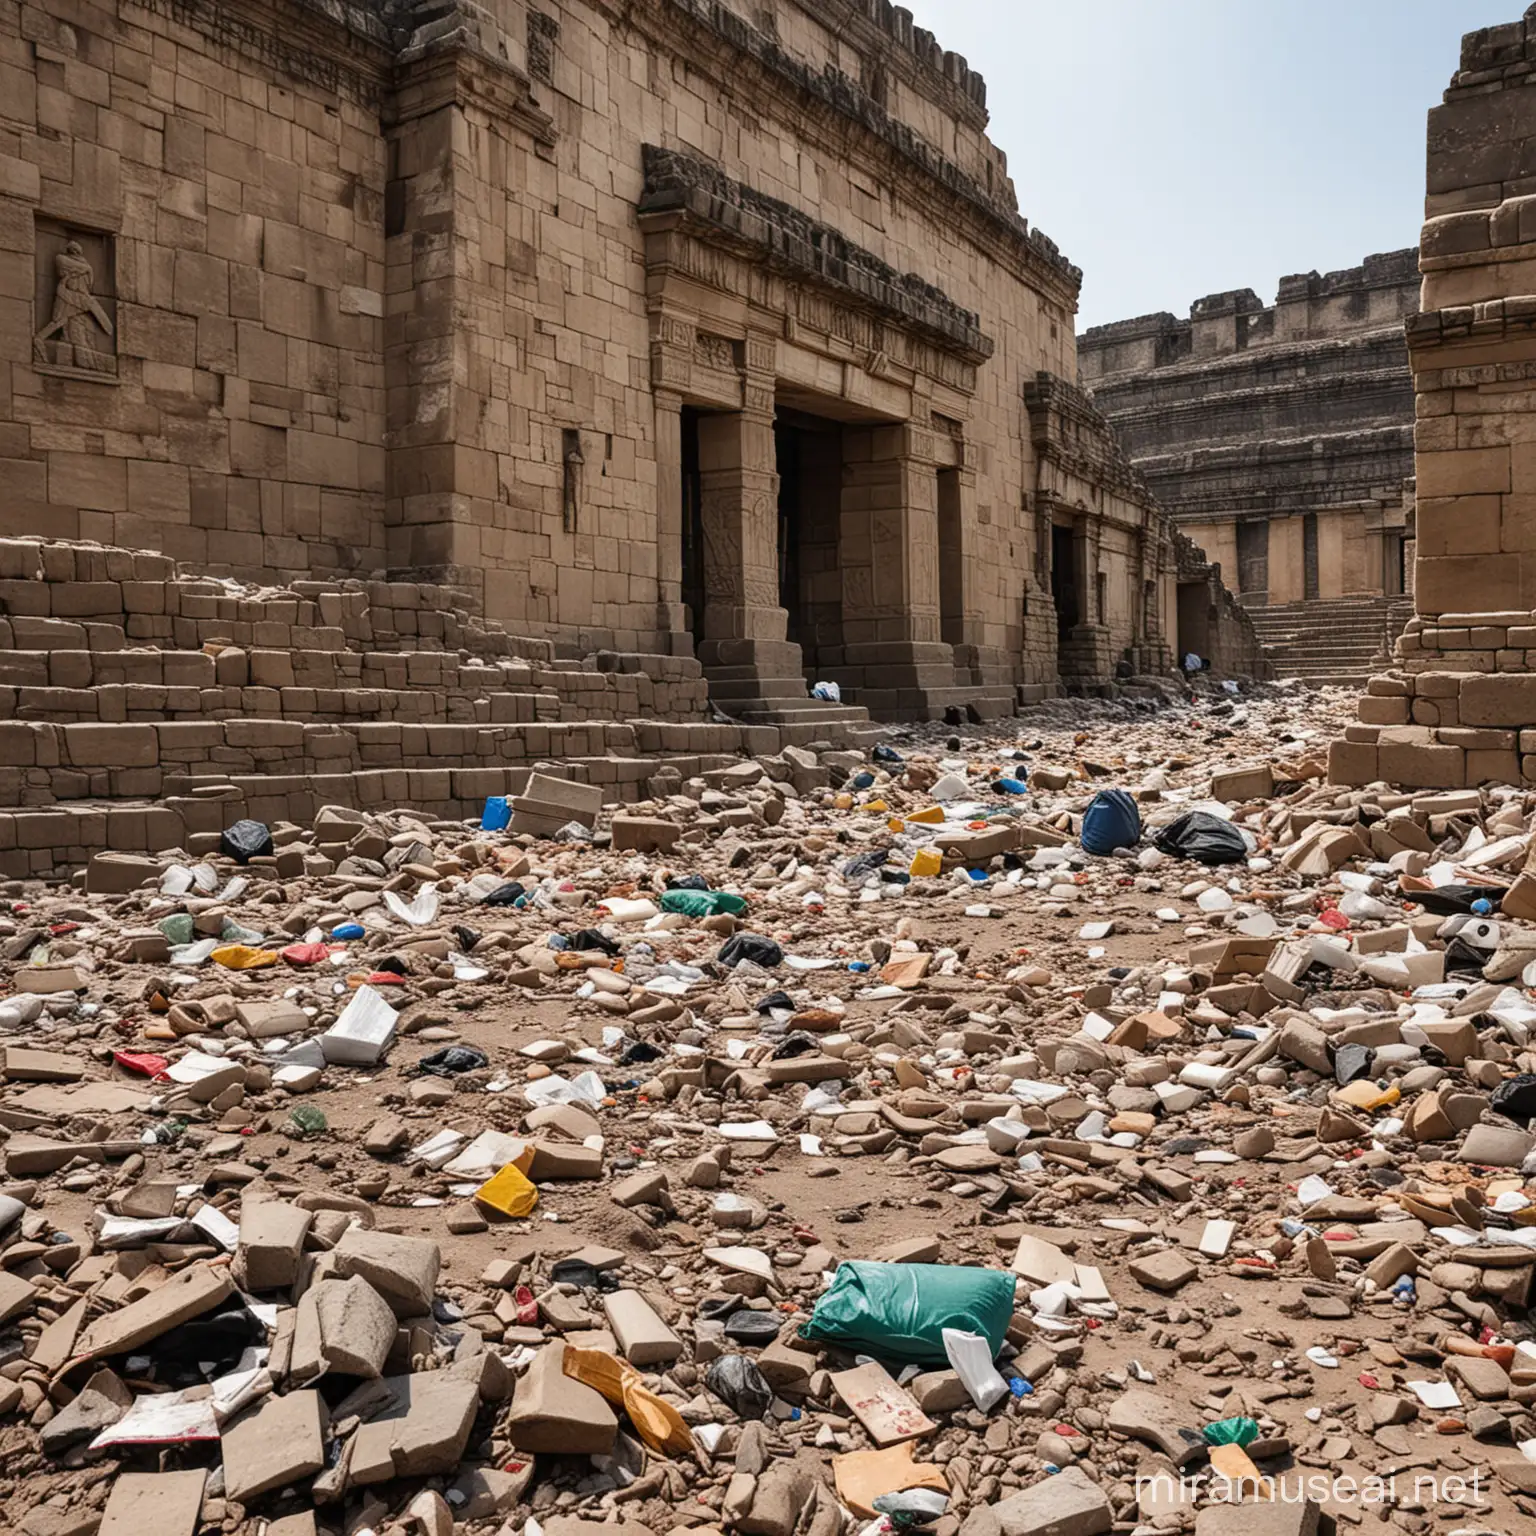 Garbage in a aztec mysterious temple
